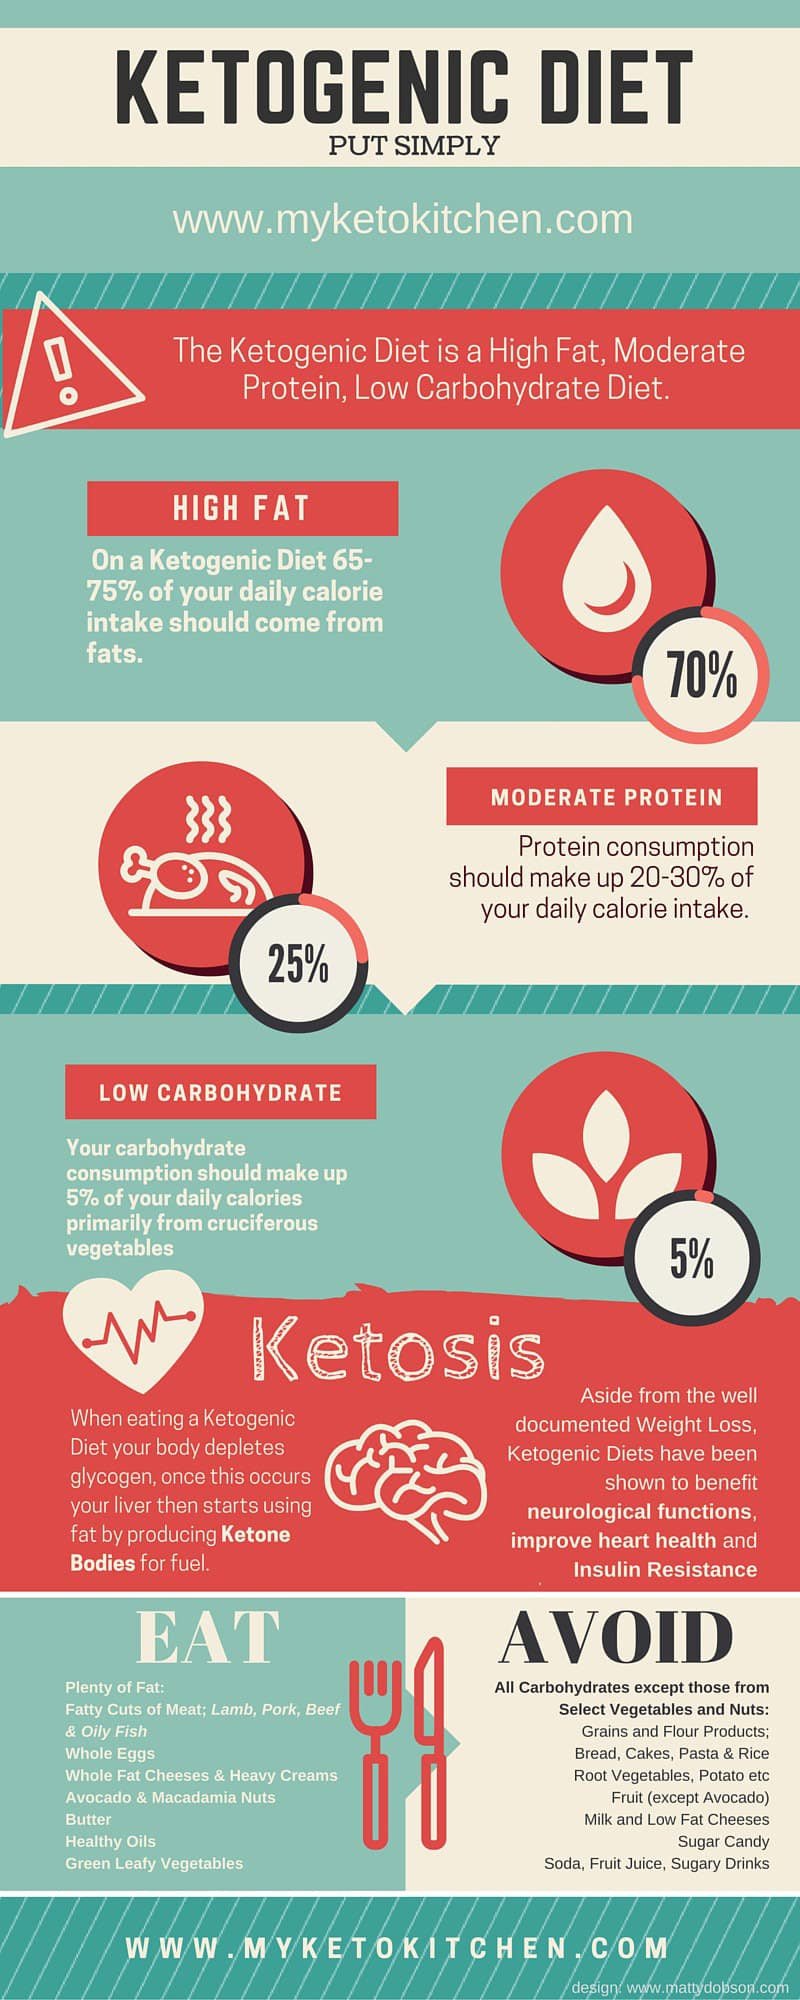 Keto Diet Bad
 How Much Protein A Keto Diet Is Too Much Bad for Ketosis